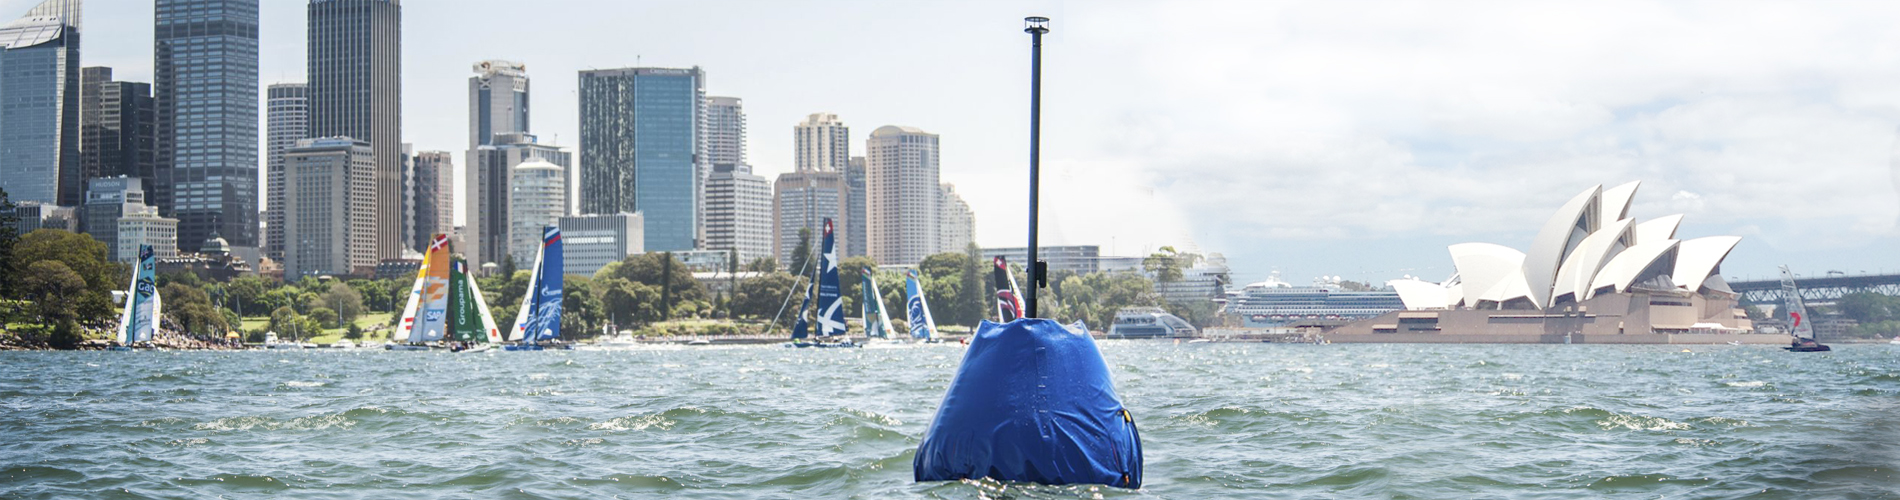 WindBot on a buoy during a race with Sydney Opera House in the background